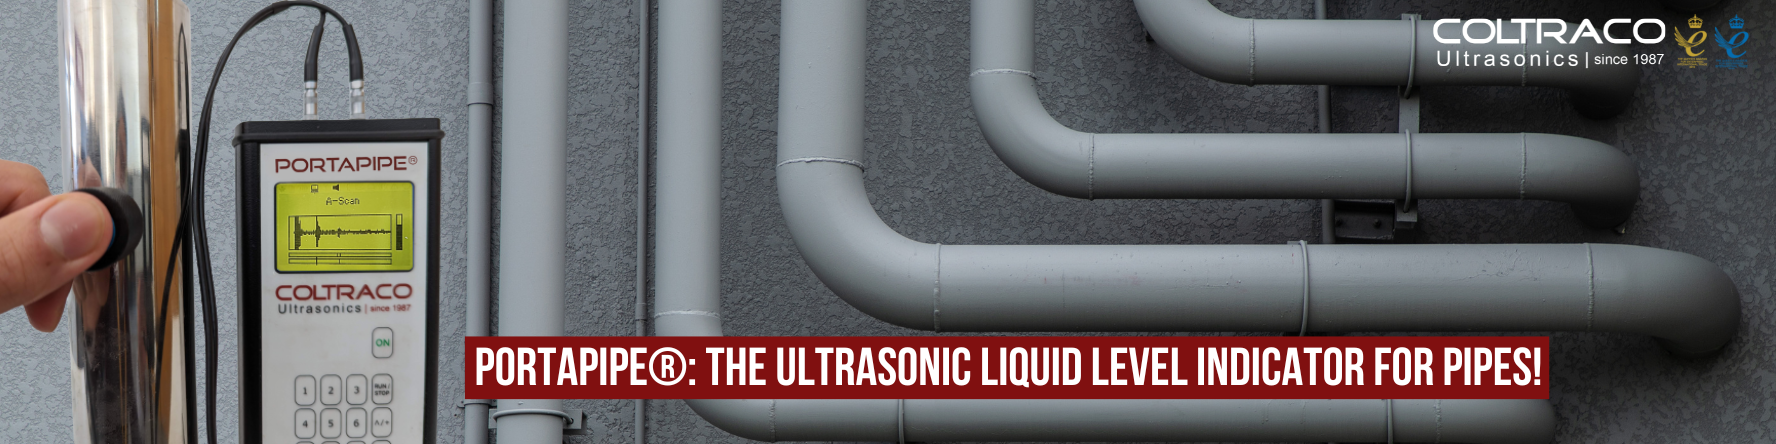 Introducing Portapipe® - The Ultrasonic Liquid Level Indicator for Pipes!